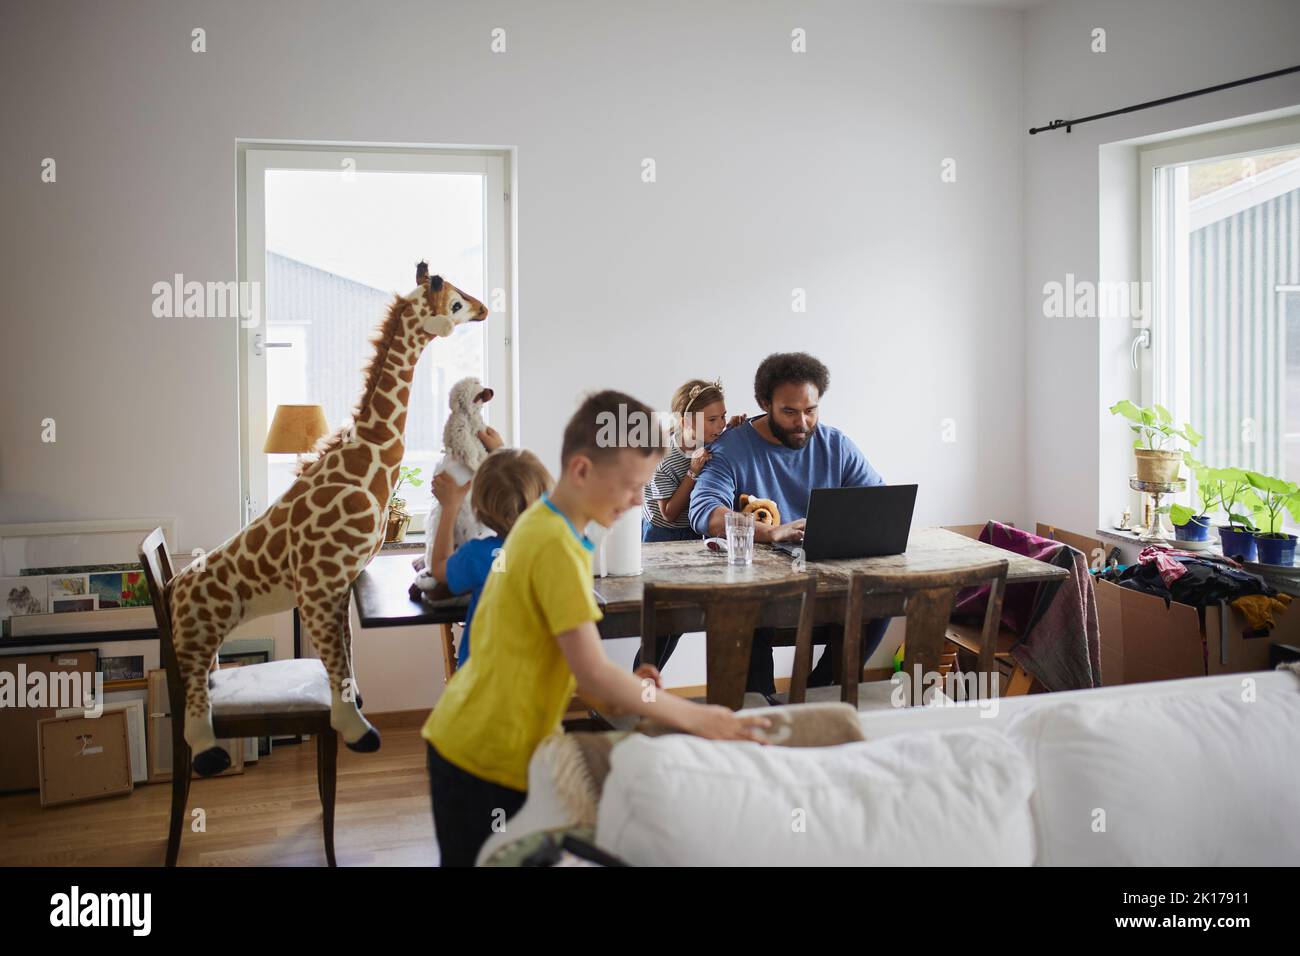 Father working from home and taking care of children Stock Photo